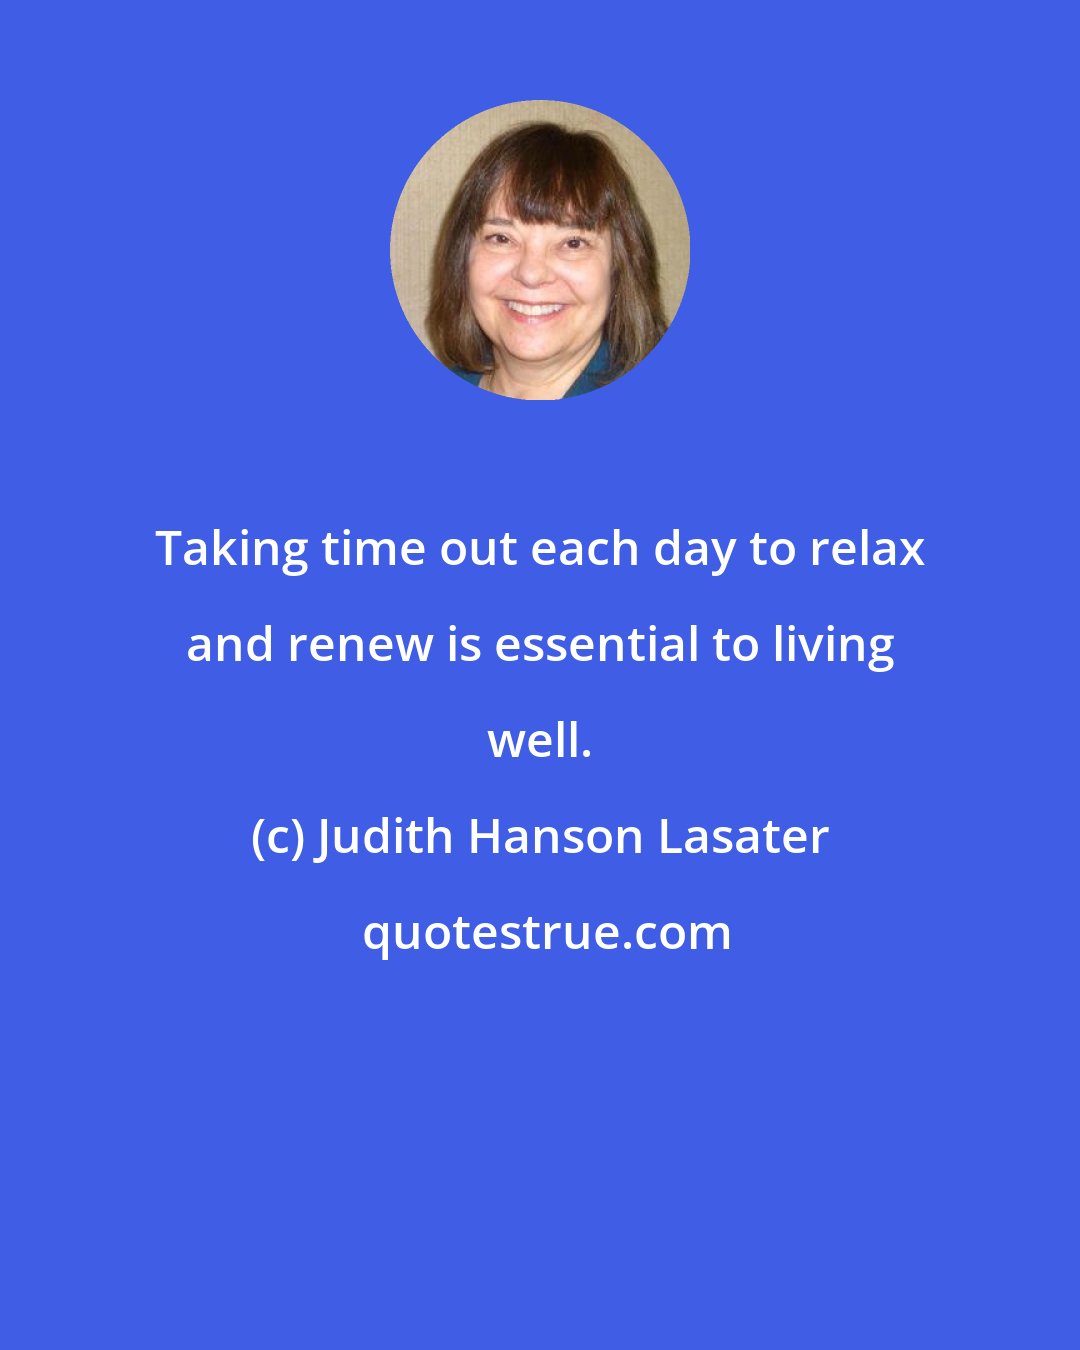 Judith Hanson Lasater: Taking time out each day to relax and renew is essential to living well.